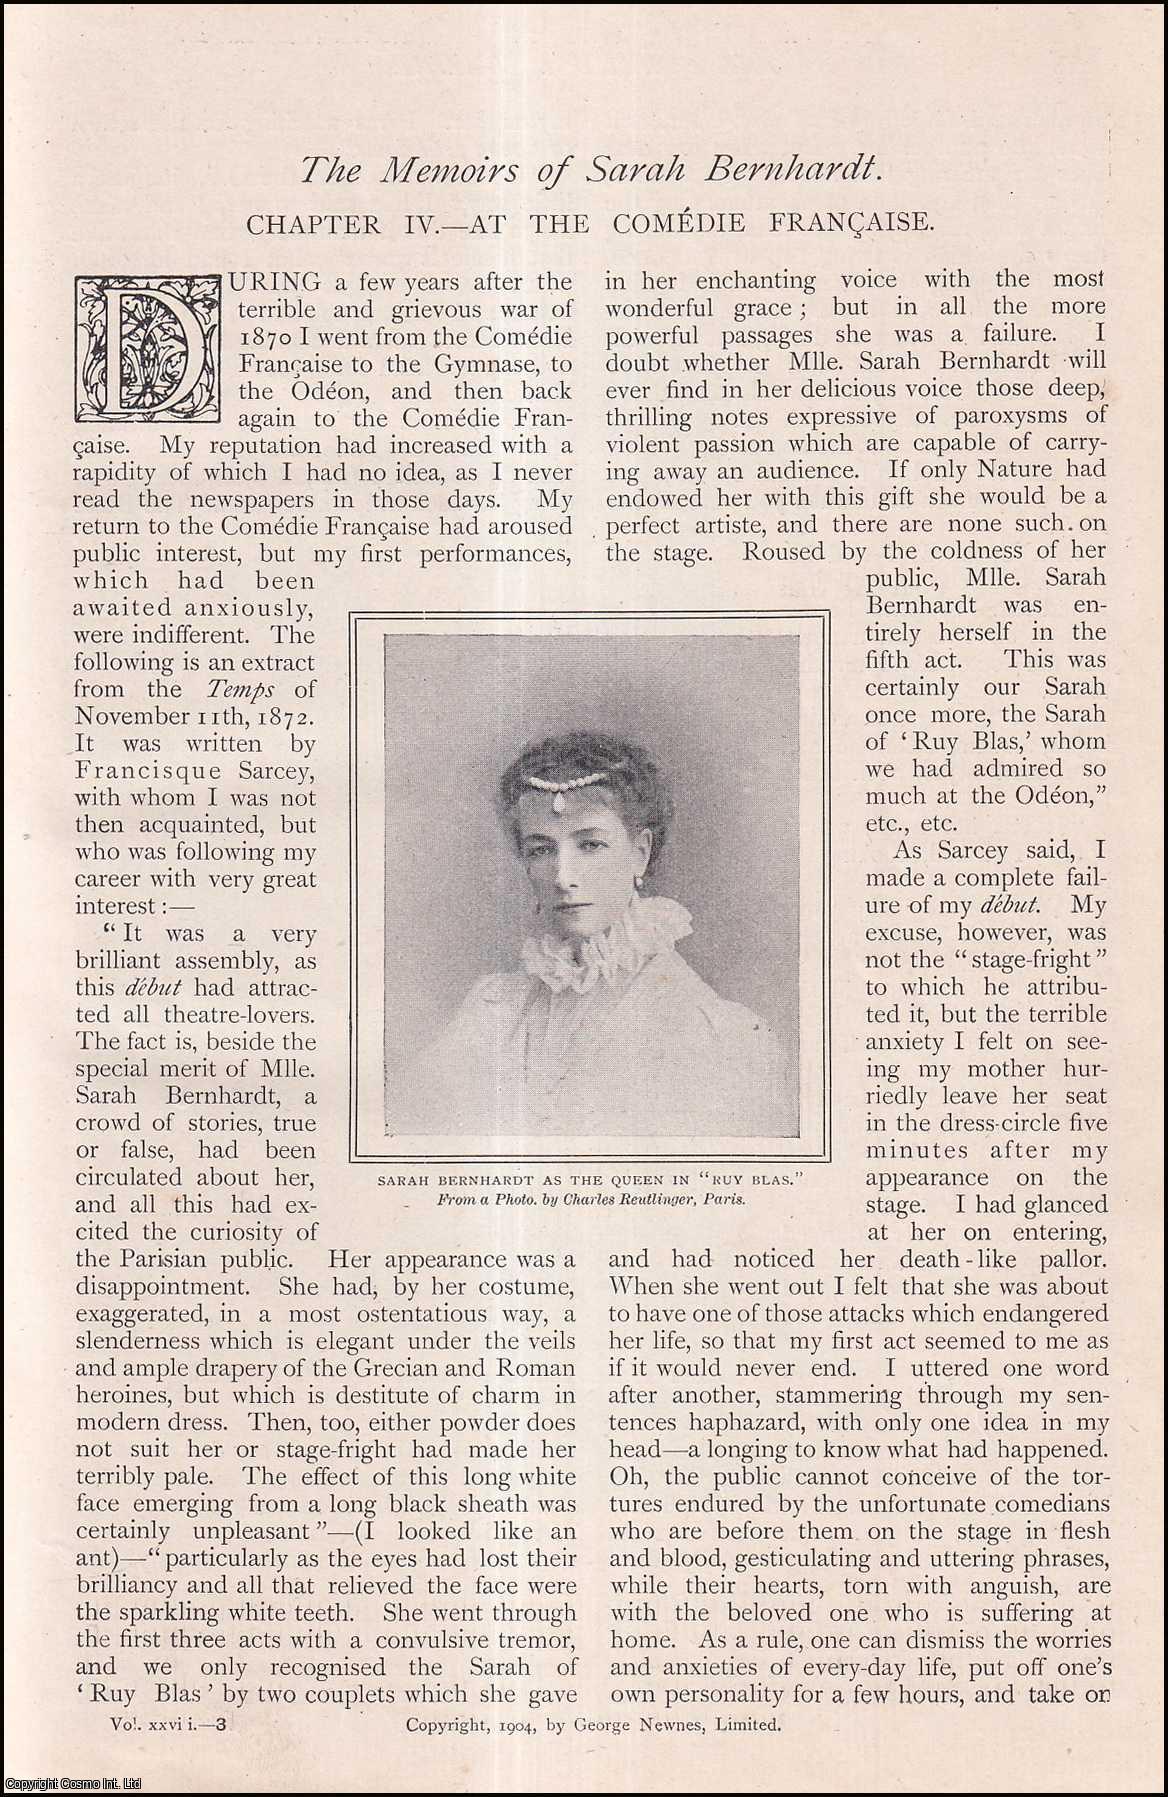 --- - At The Comedie Francaise. The Memoirs of Sarah Bernhardt. A rare original article from The Strand Magazine, 1904.